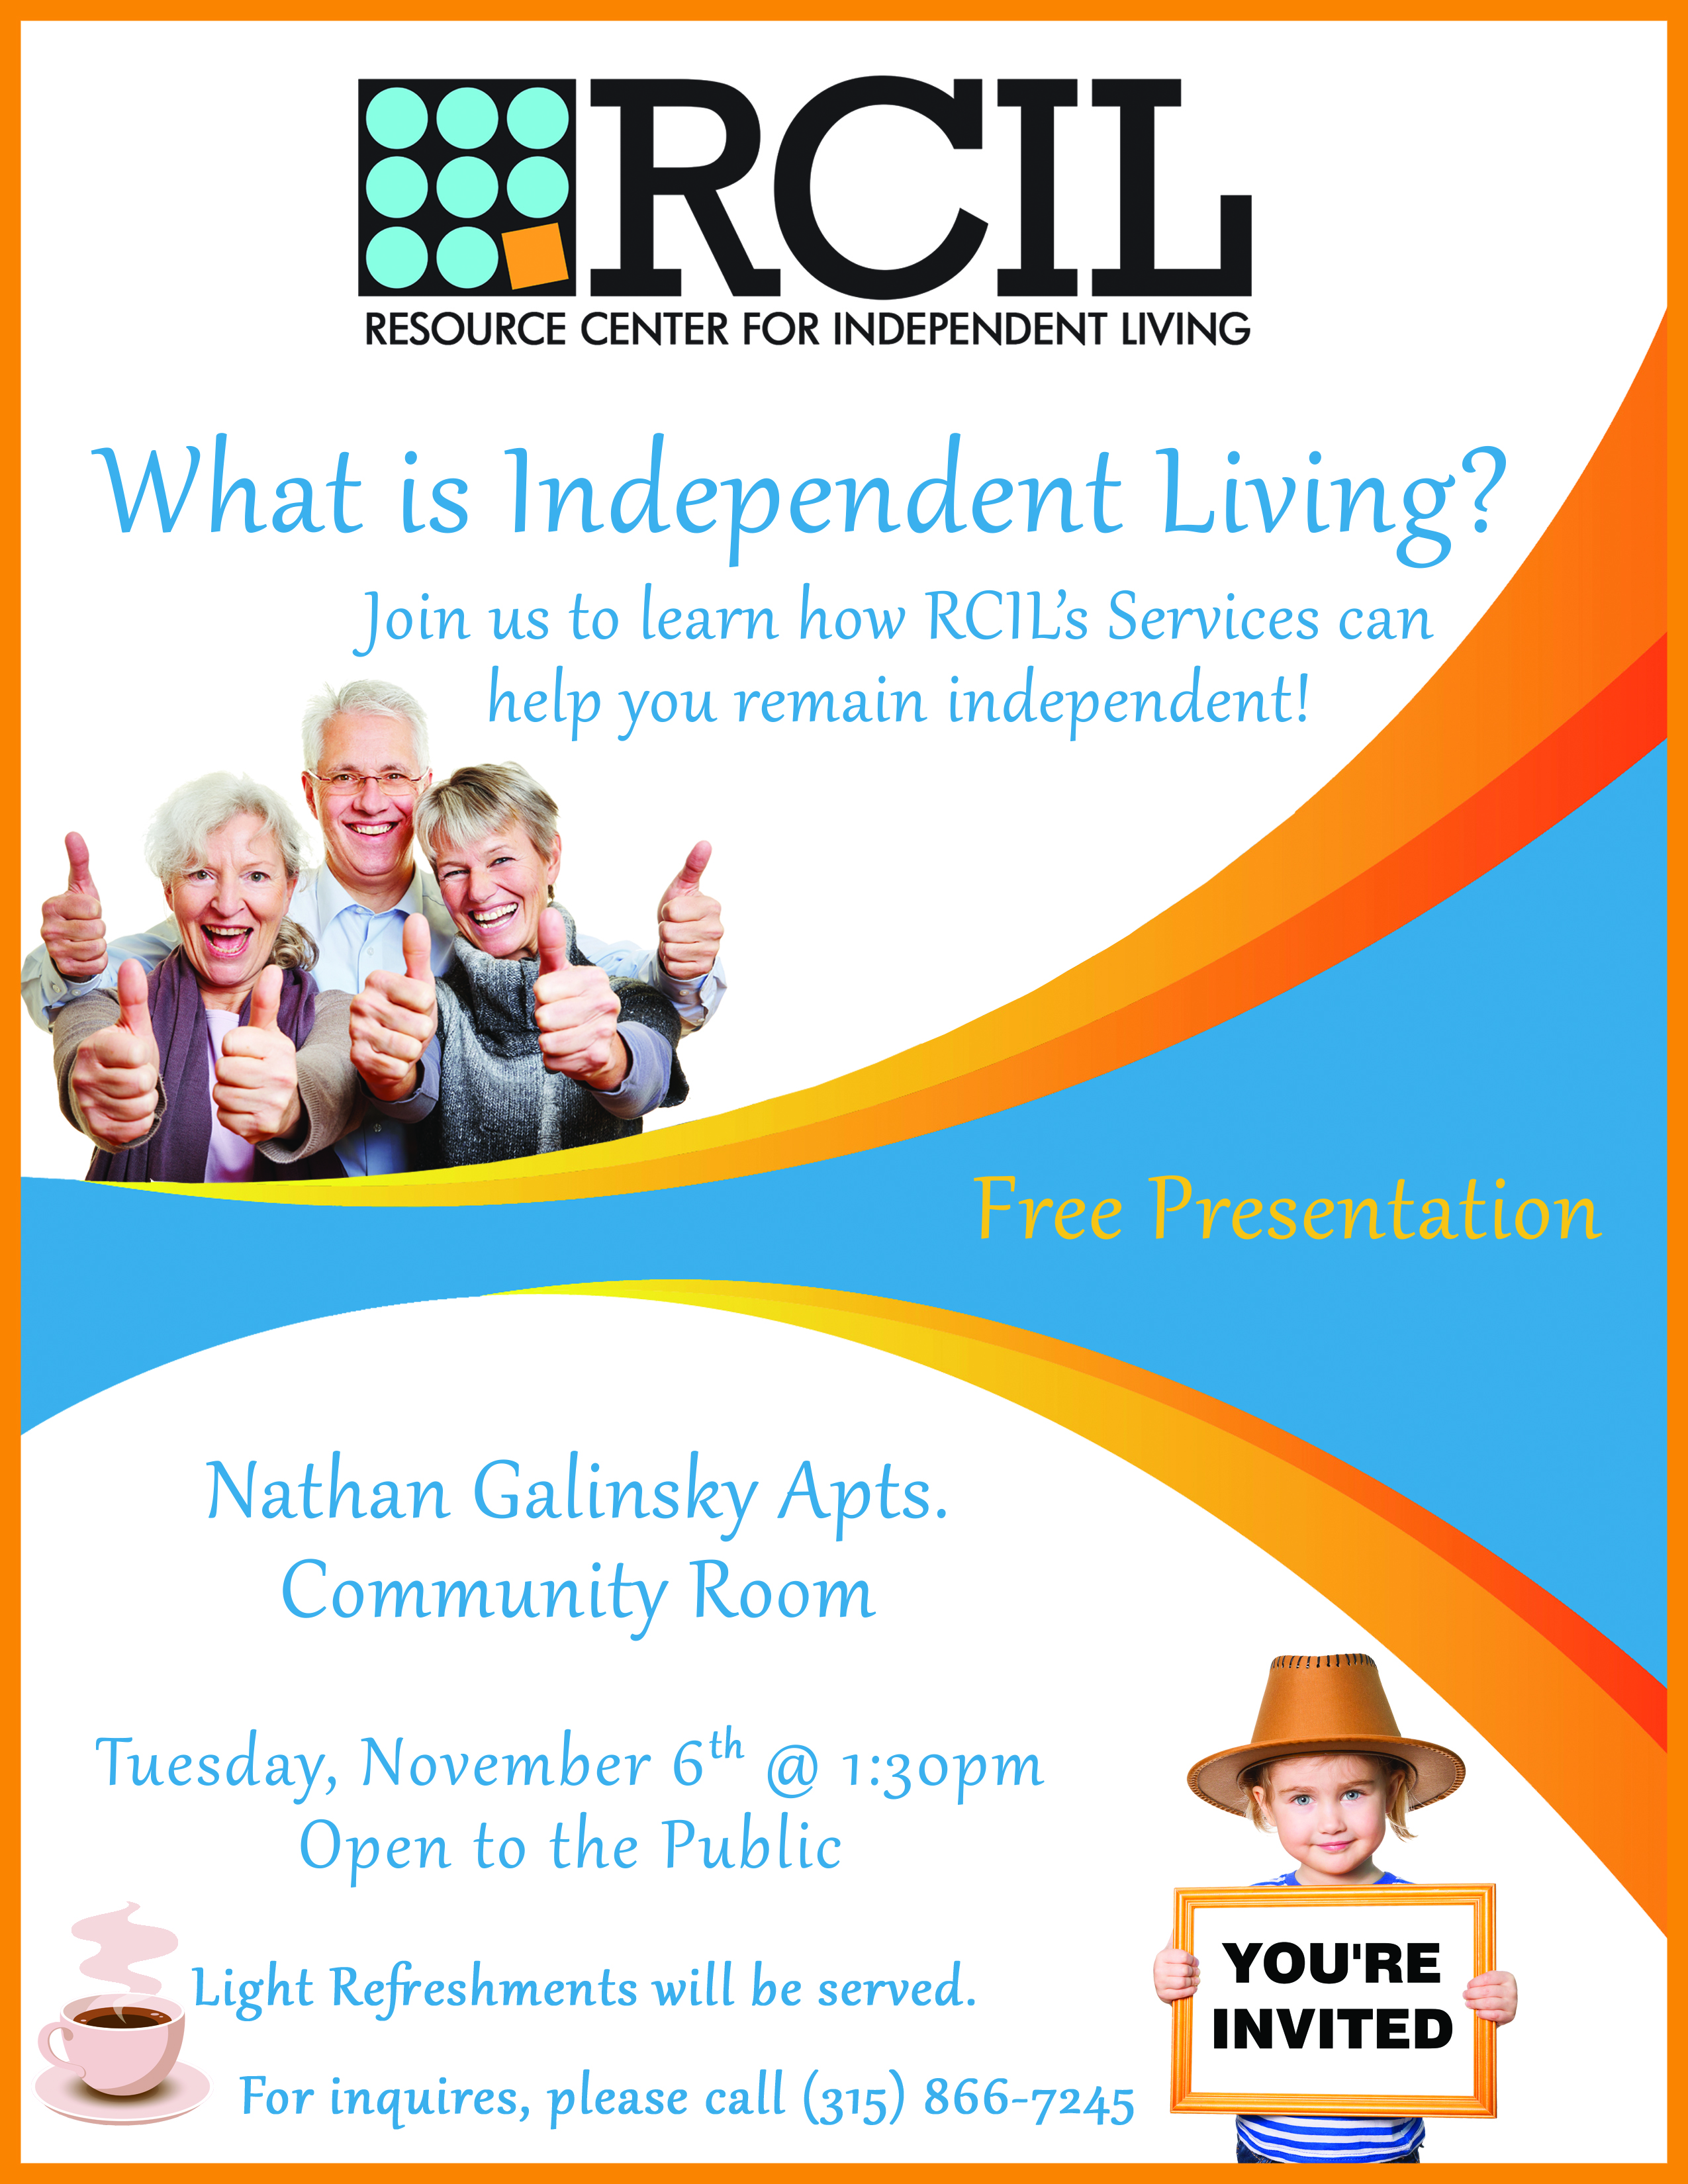 Join us on November 6th at 1:30pm at Nathan Galinskey Apartments in Herkimer to learn how RCIL's Services can help you remain independent! 